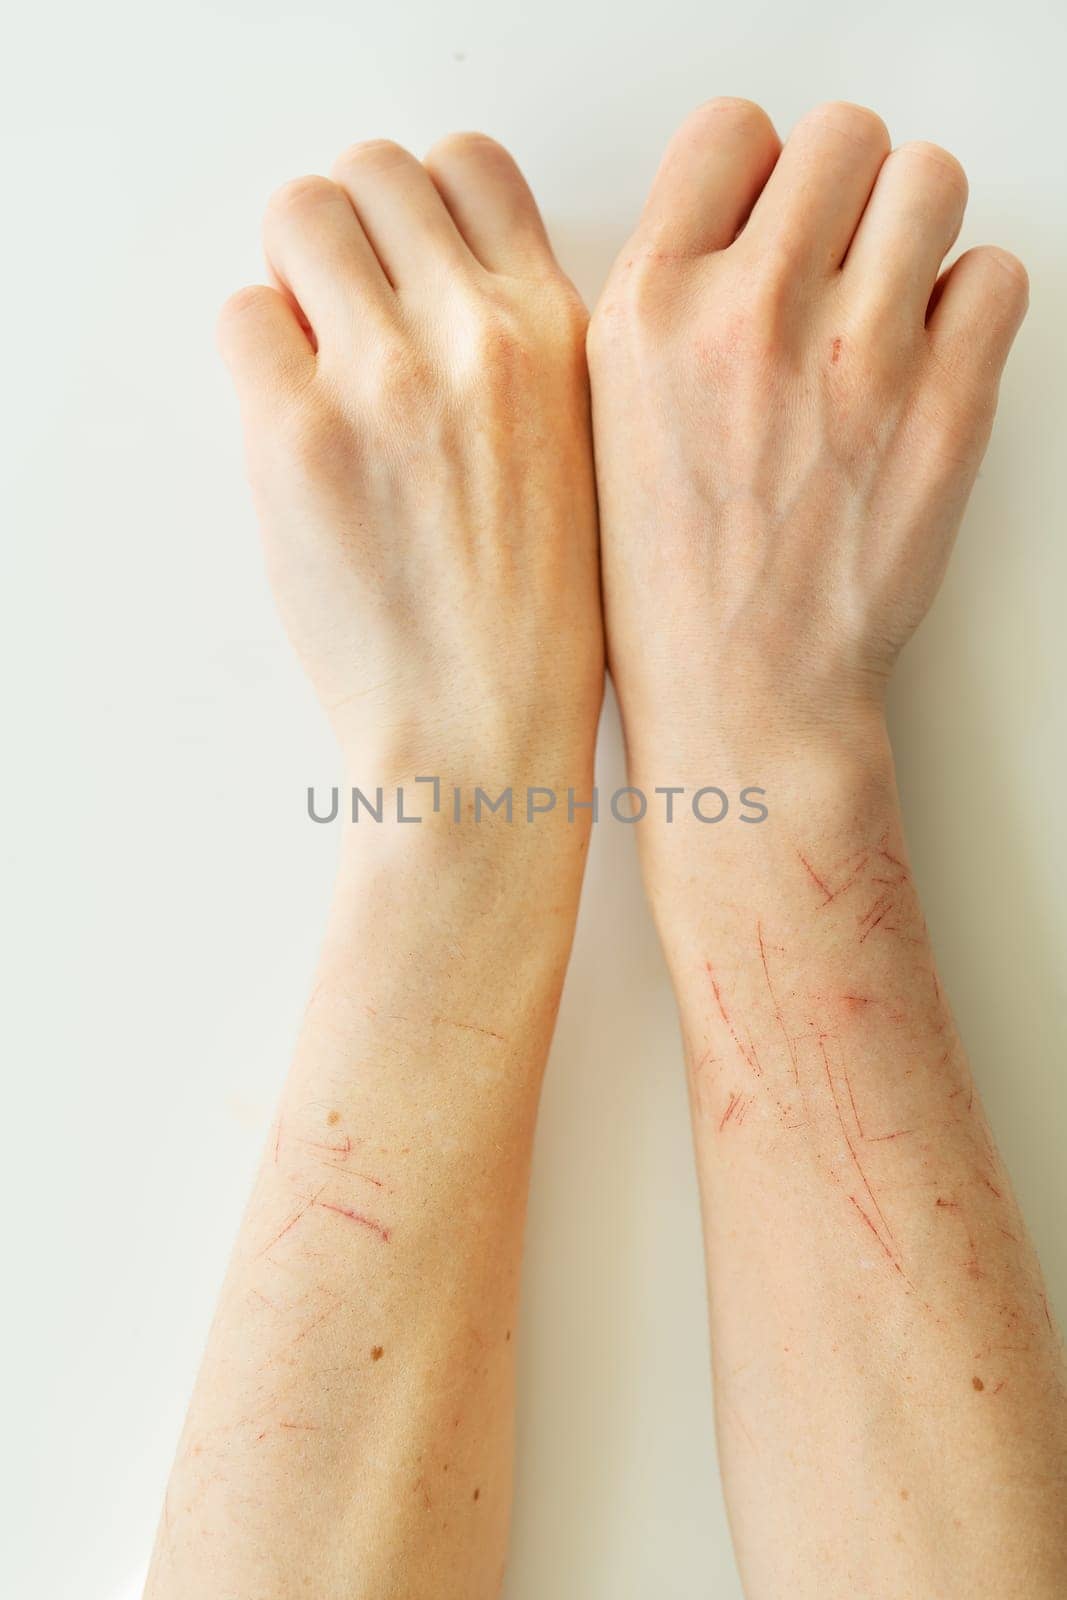 The person is scratched all over, dry skin on the arm, wounds on the arm, scars, psoriasis vulgaris, eczema or other skin diseases. Miscellaneous autoimmune genetic disease. by sfinks